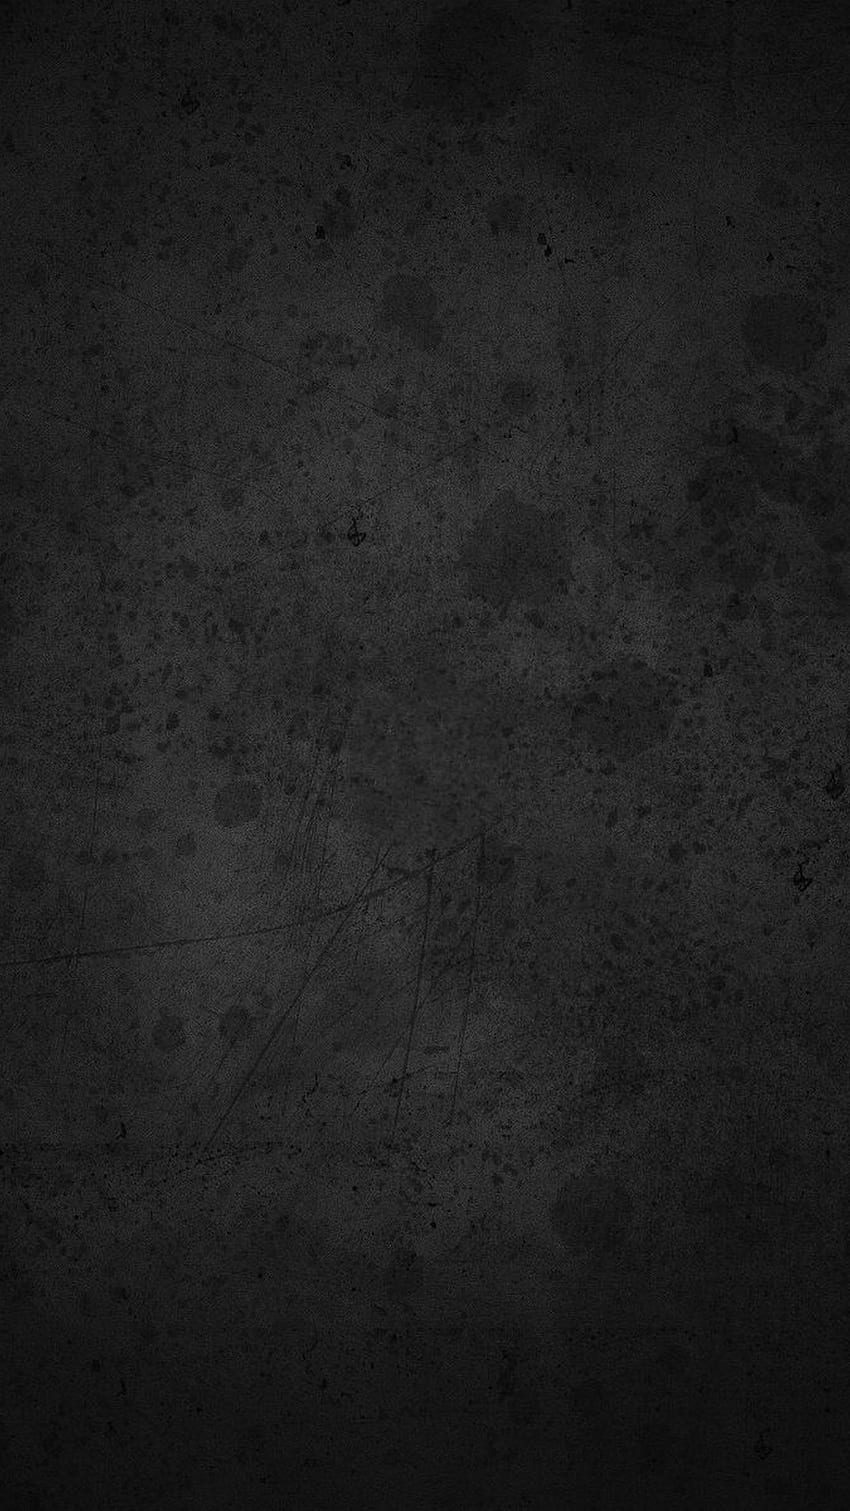 Concrete Texture Abstract Mobile 4590 - iPhone 7 Plus Black - HD phone wallpaper